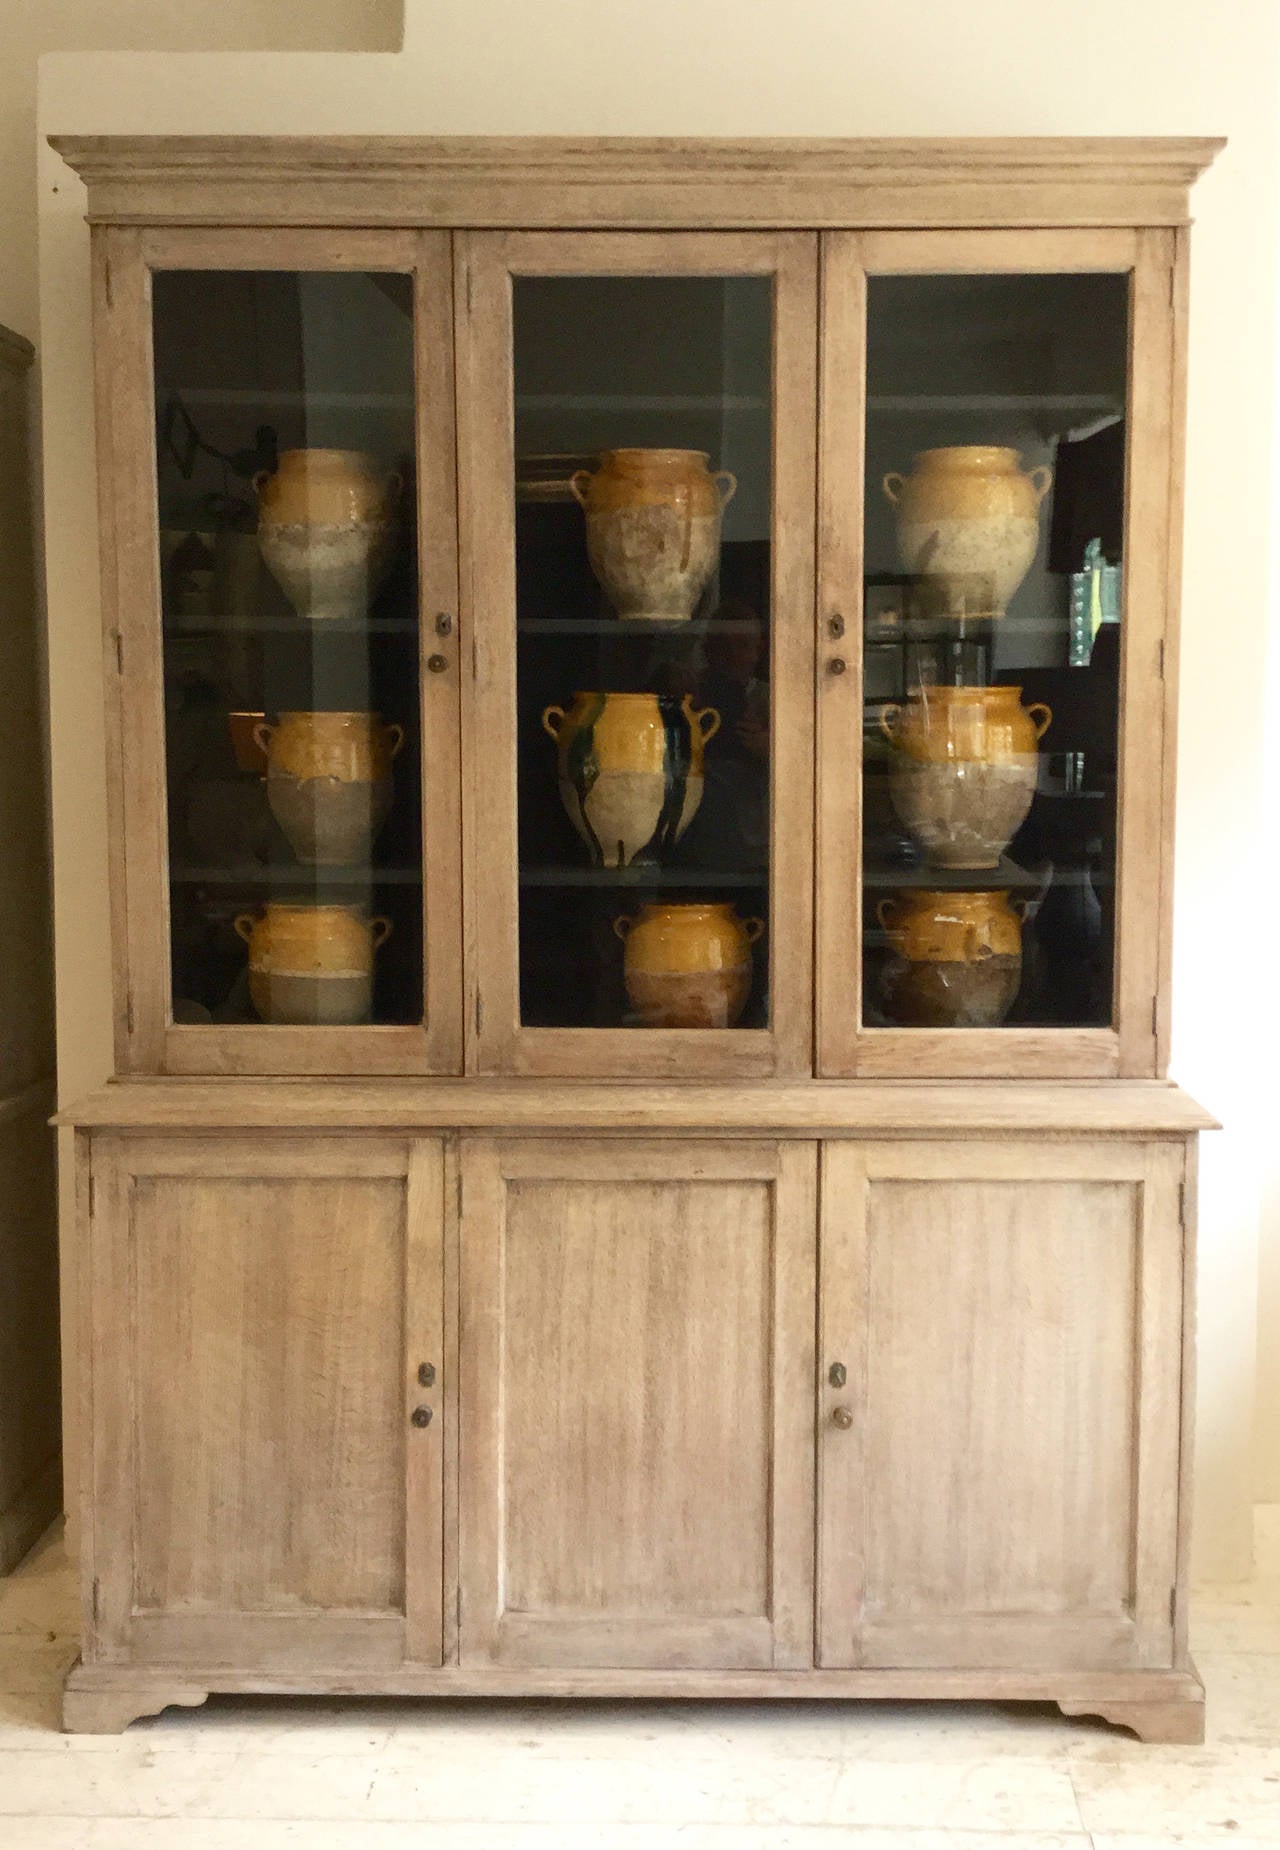 A handsome bleached oak English vitrine in two parts from the 19th century with original glaze (glass) and adjustable shelves. The upper section interior is painted in a charcoal paint.